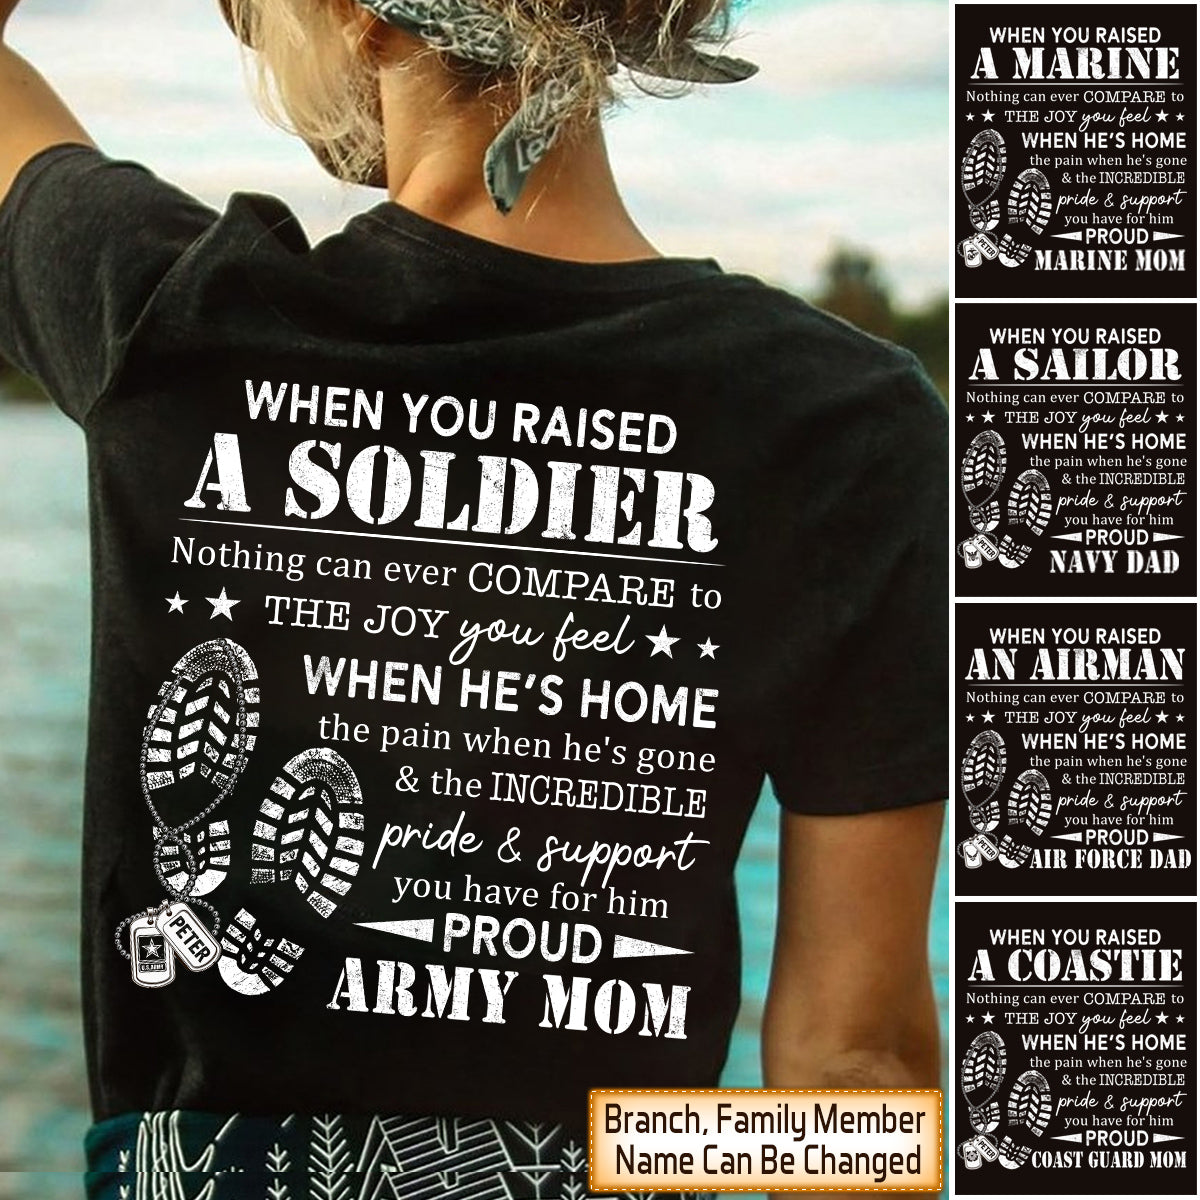 Personalized Shirts Armed Forces When You Raised A Soldier Nothing Can Ever Compare To The Joy You Feel When He's Home Military Shirt HK10 Trhn